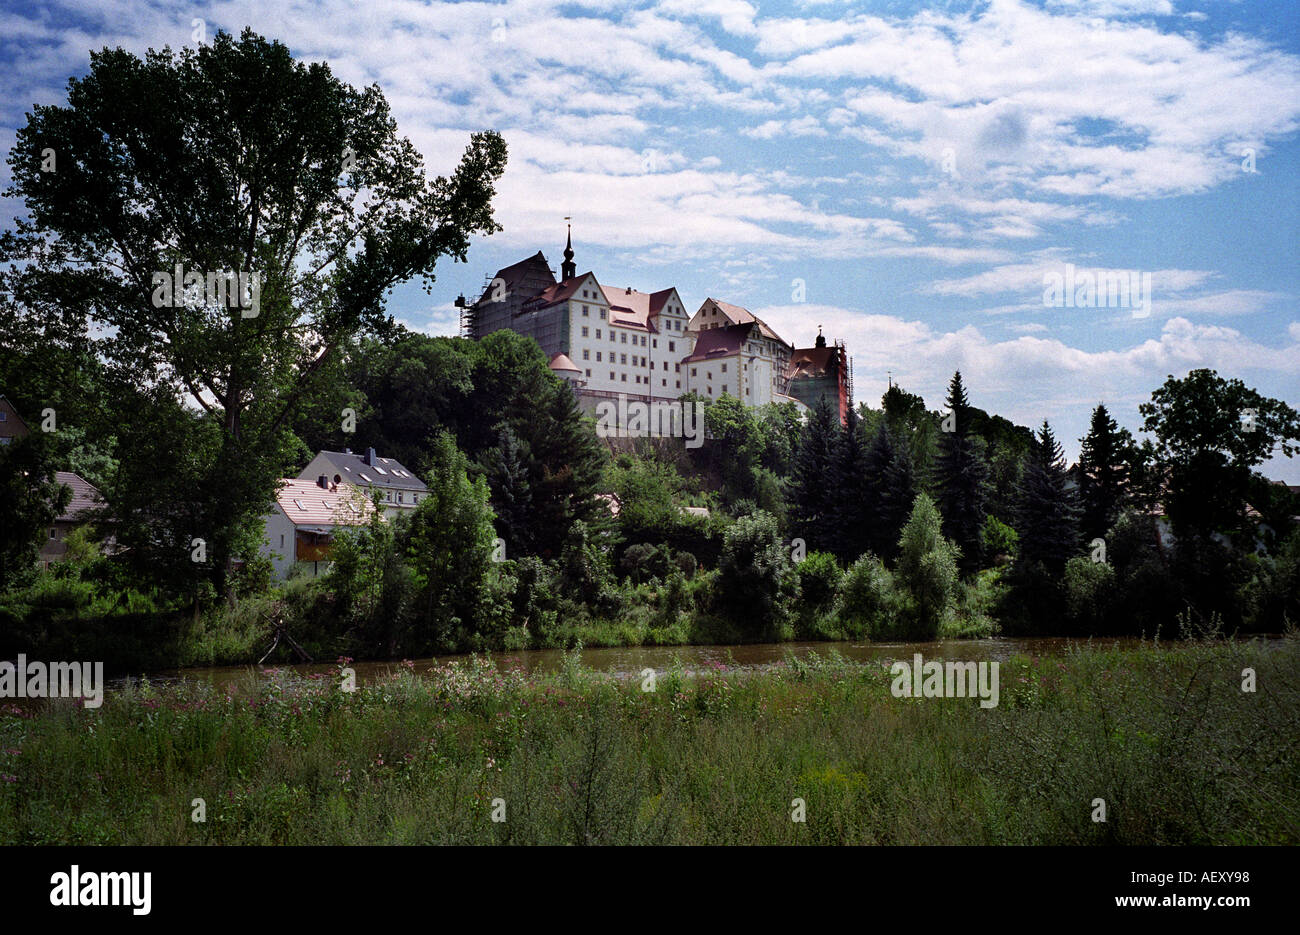 COLDITZ CASTLE Germany. OFFICERS POW CAMP  DURING WW11. Looking up from field where escaping prisoners expected to land Glider. Stock Photo